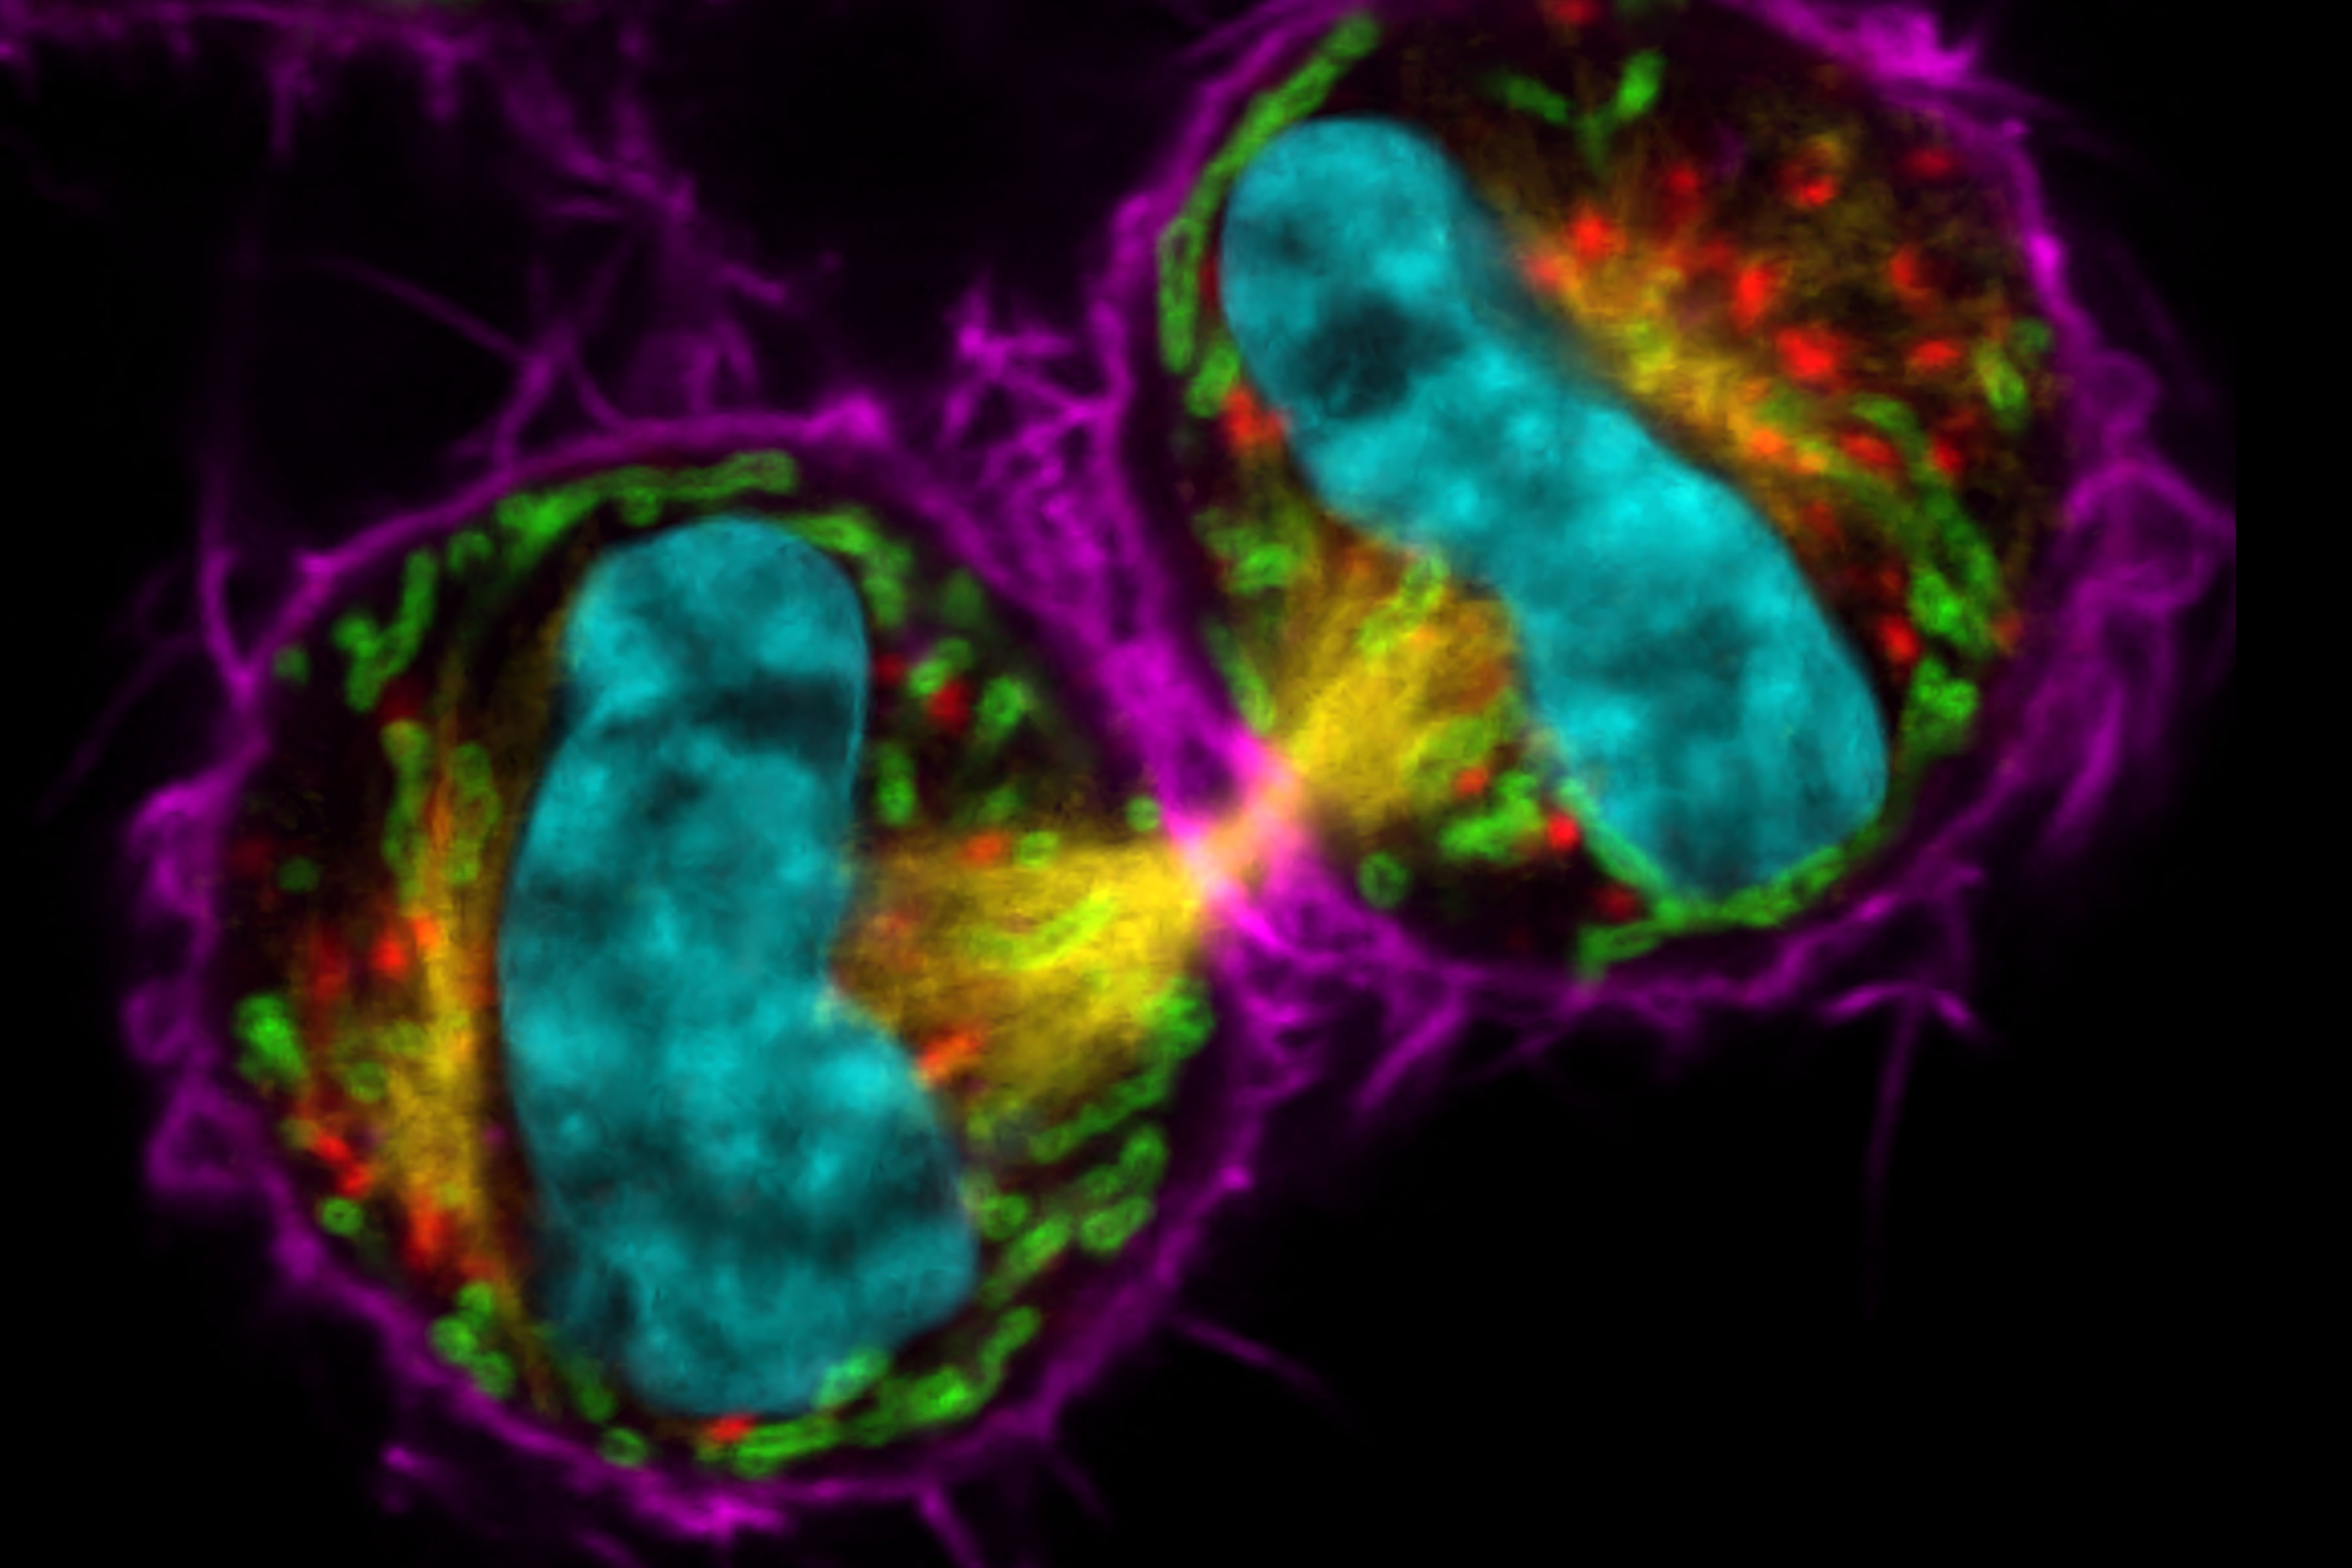 Mitotic COS7 mitotic cells. Chromatin (cyan, mCherry), mitotic spindle (yellow, EGFP), Golgi (red, Atto647N), mitochondria (green, AF532), actin filaments (magenta, SiR700). Sample courtesy: Dr.Jana Döhner and Dr.sc.nat. Urs Ziegler, University of Zürich; cells expressing mCherry were a kind gift of Daniel Gehrlich. SiR was a kind gift of Spirochrome.